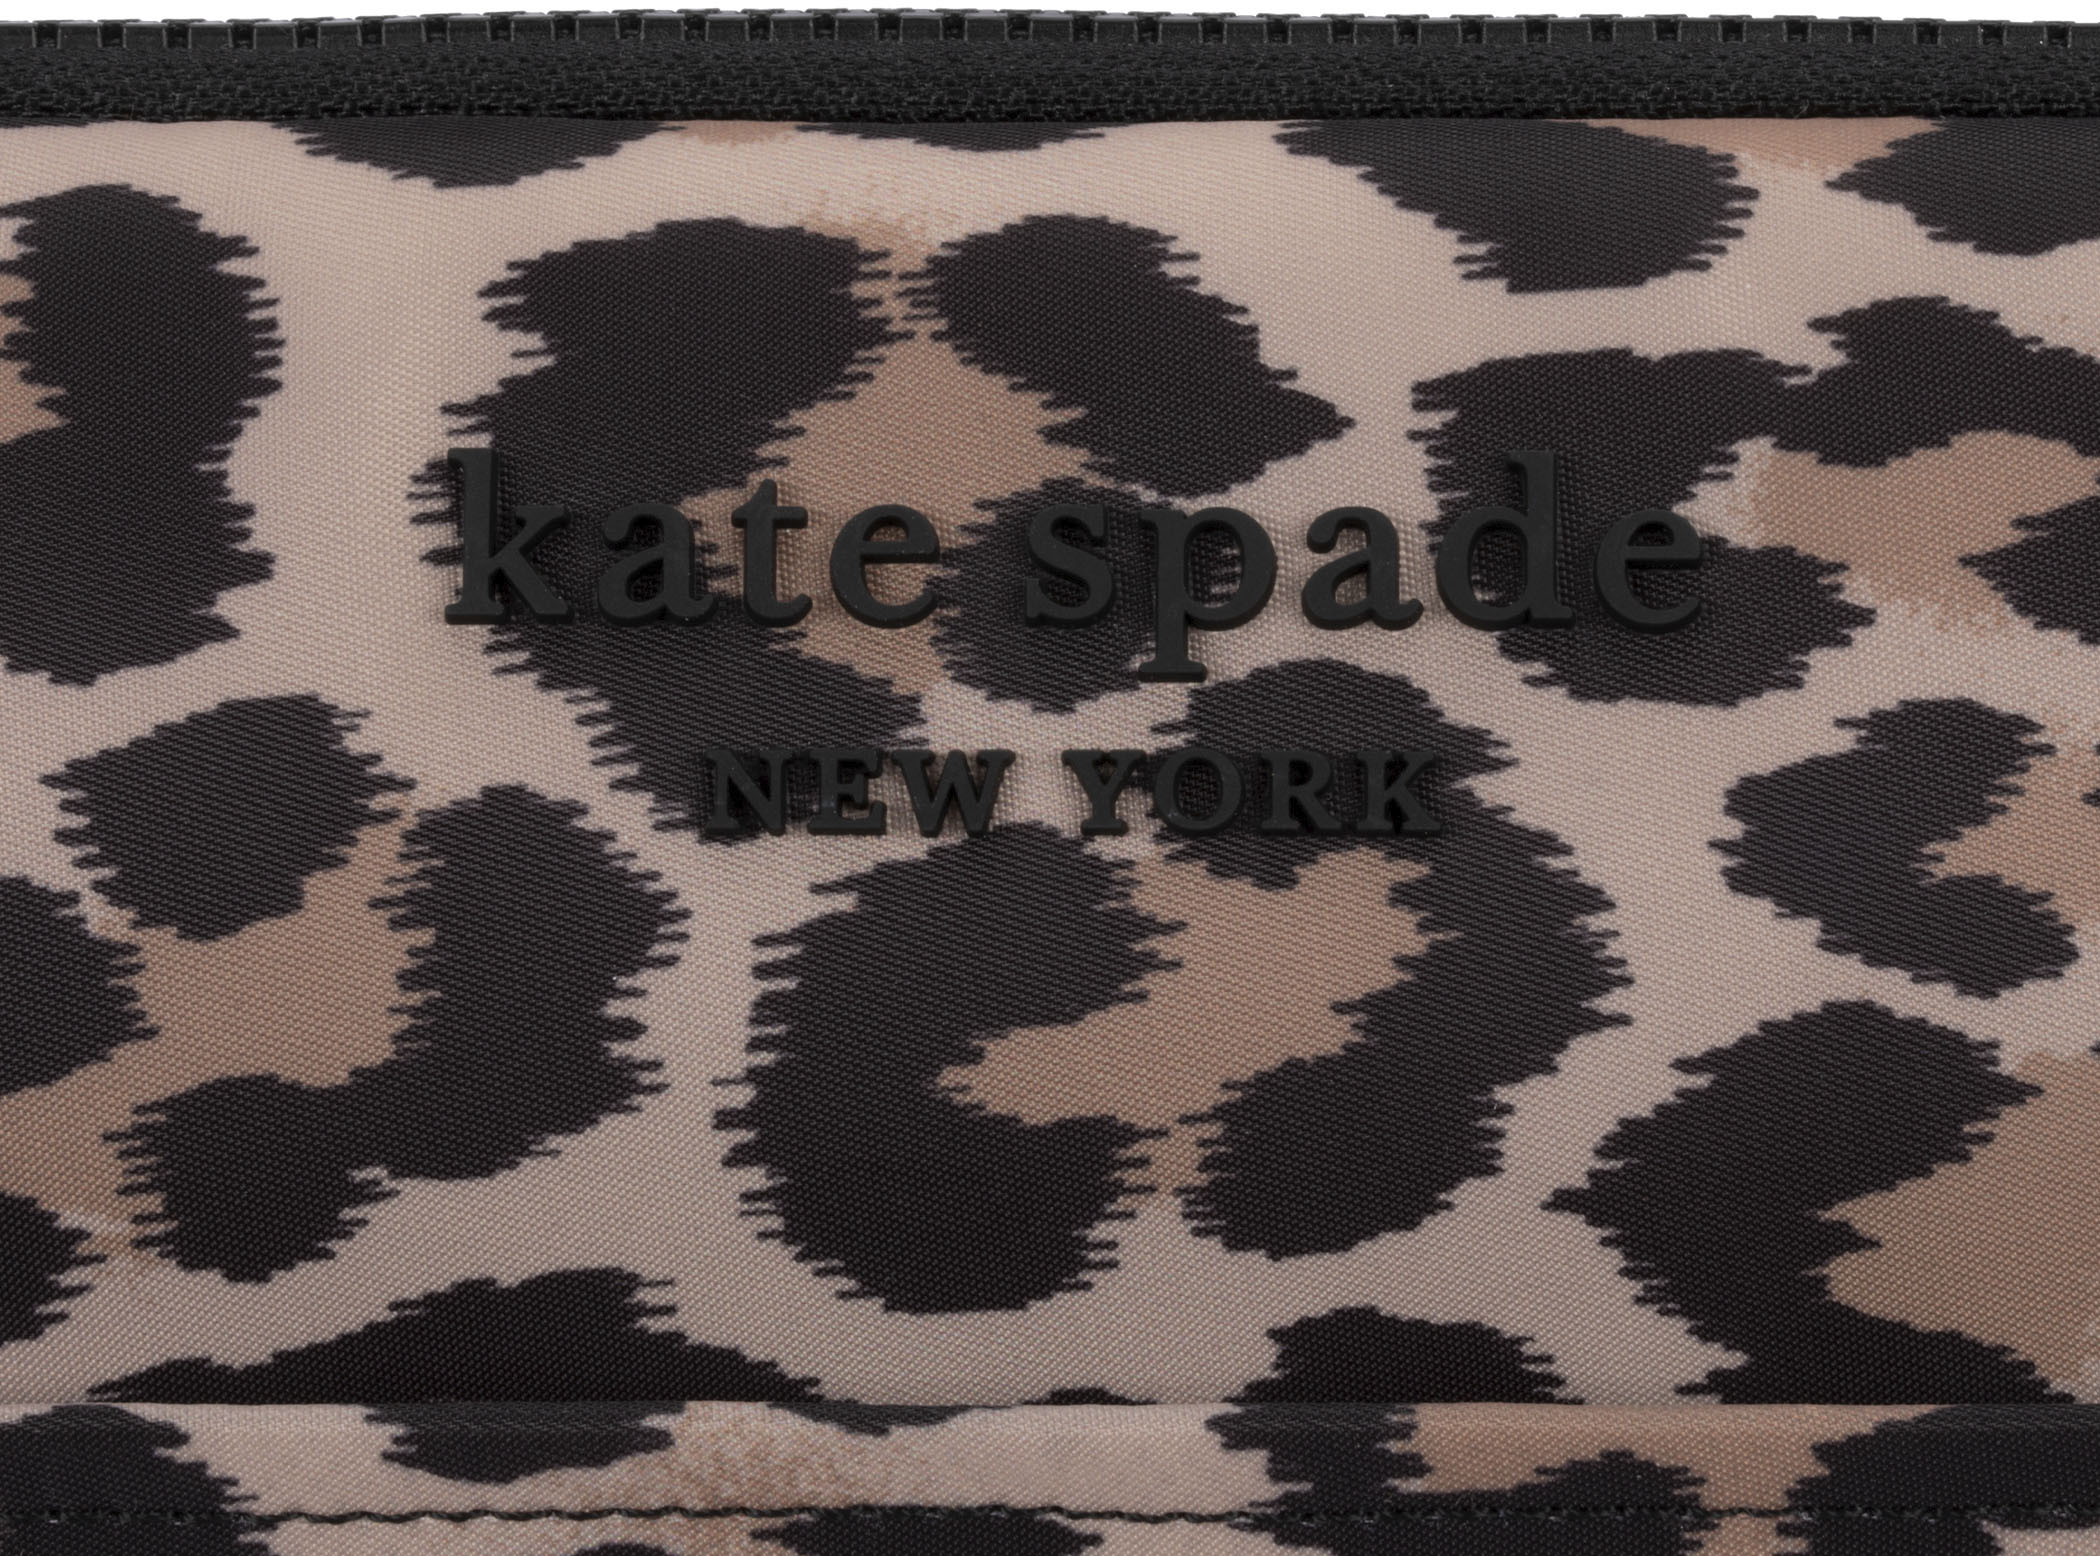 KATE SPADE velour shirt (Leopard print). Extremely comfortable